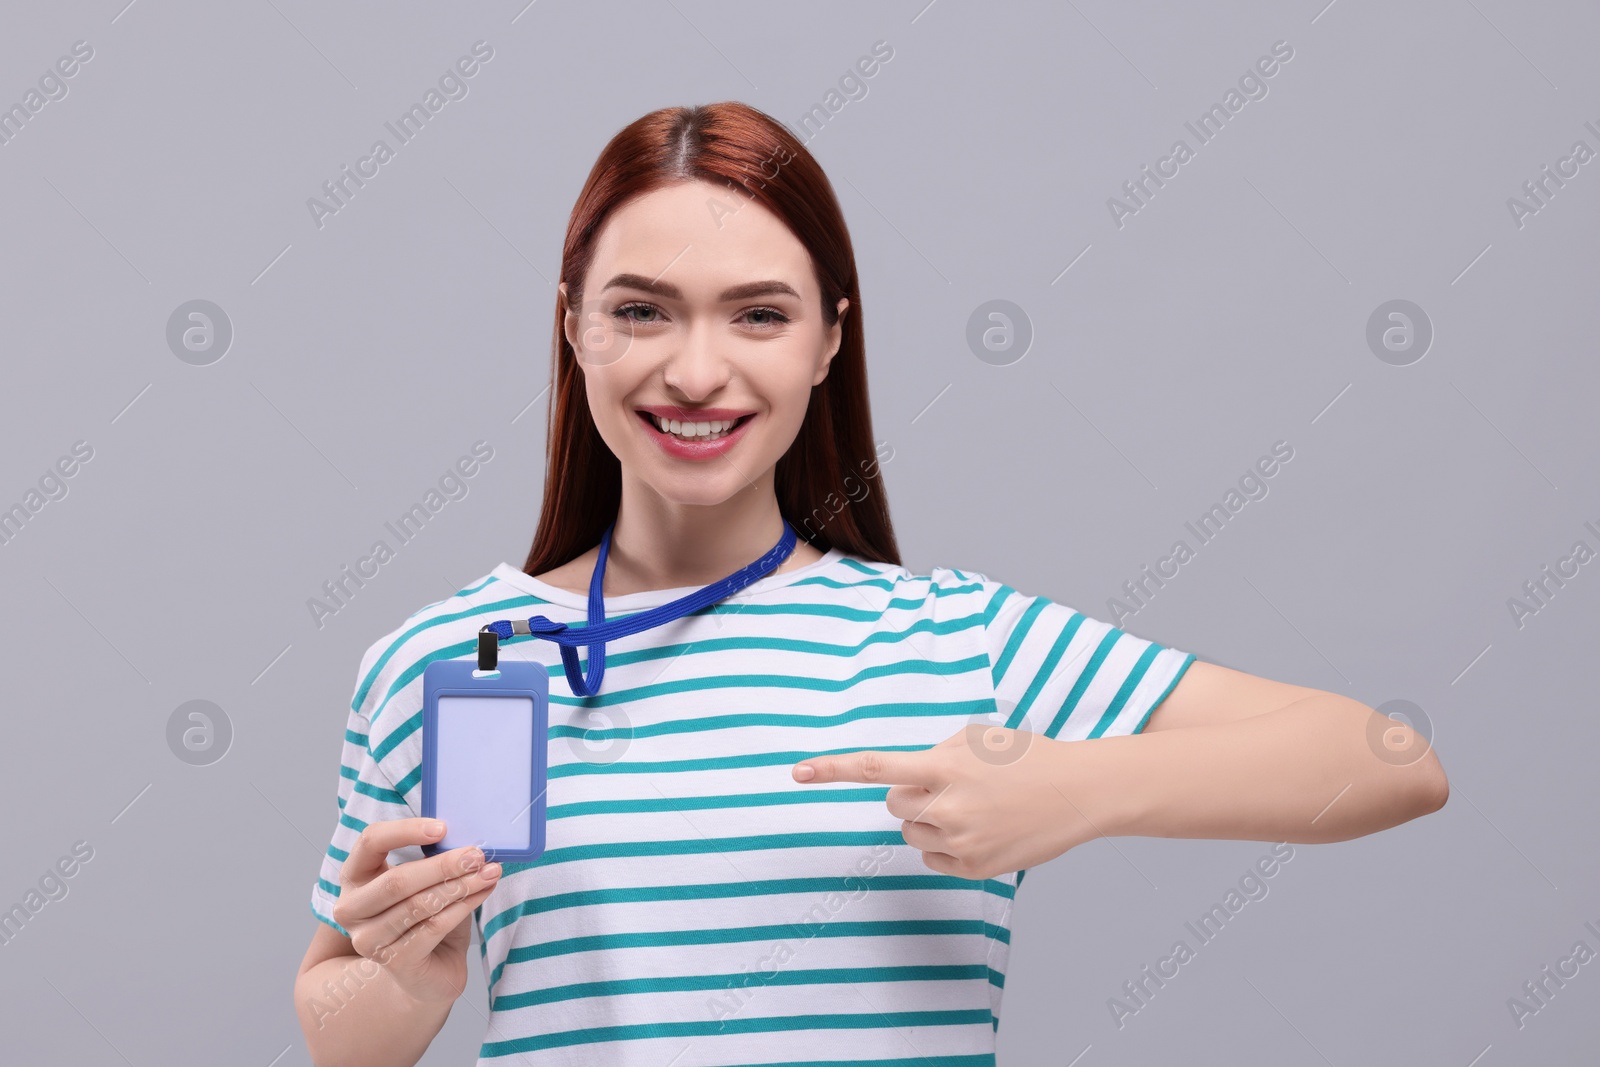 Photo of Smiling woman pointing at vip pass badge on light grey background